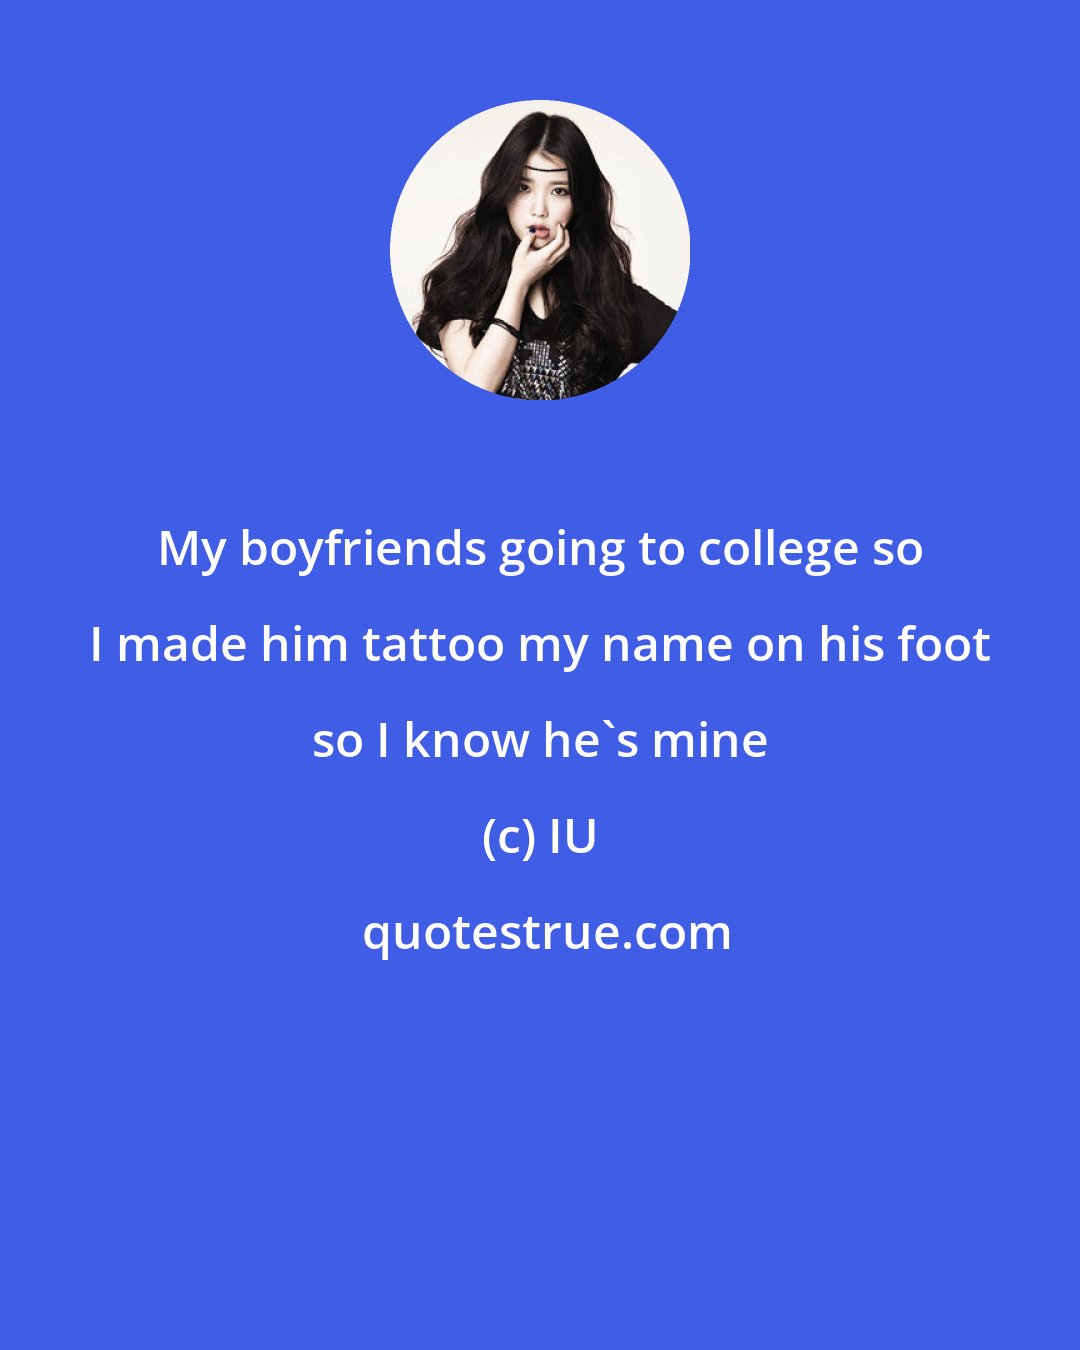 IU: My boyfriends going to college so I made him tattoo my name on his foot so I know he's mine